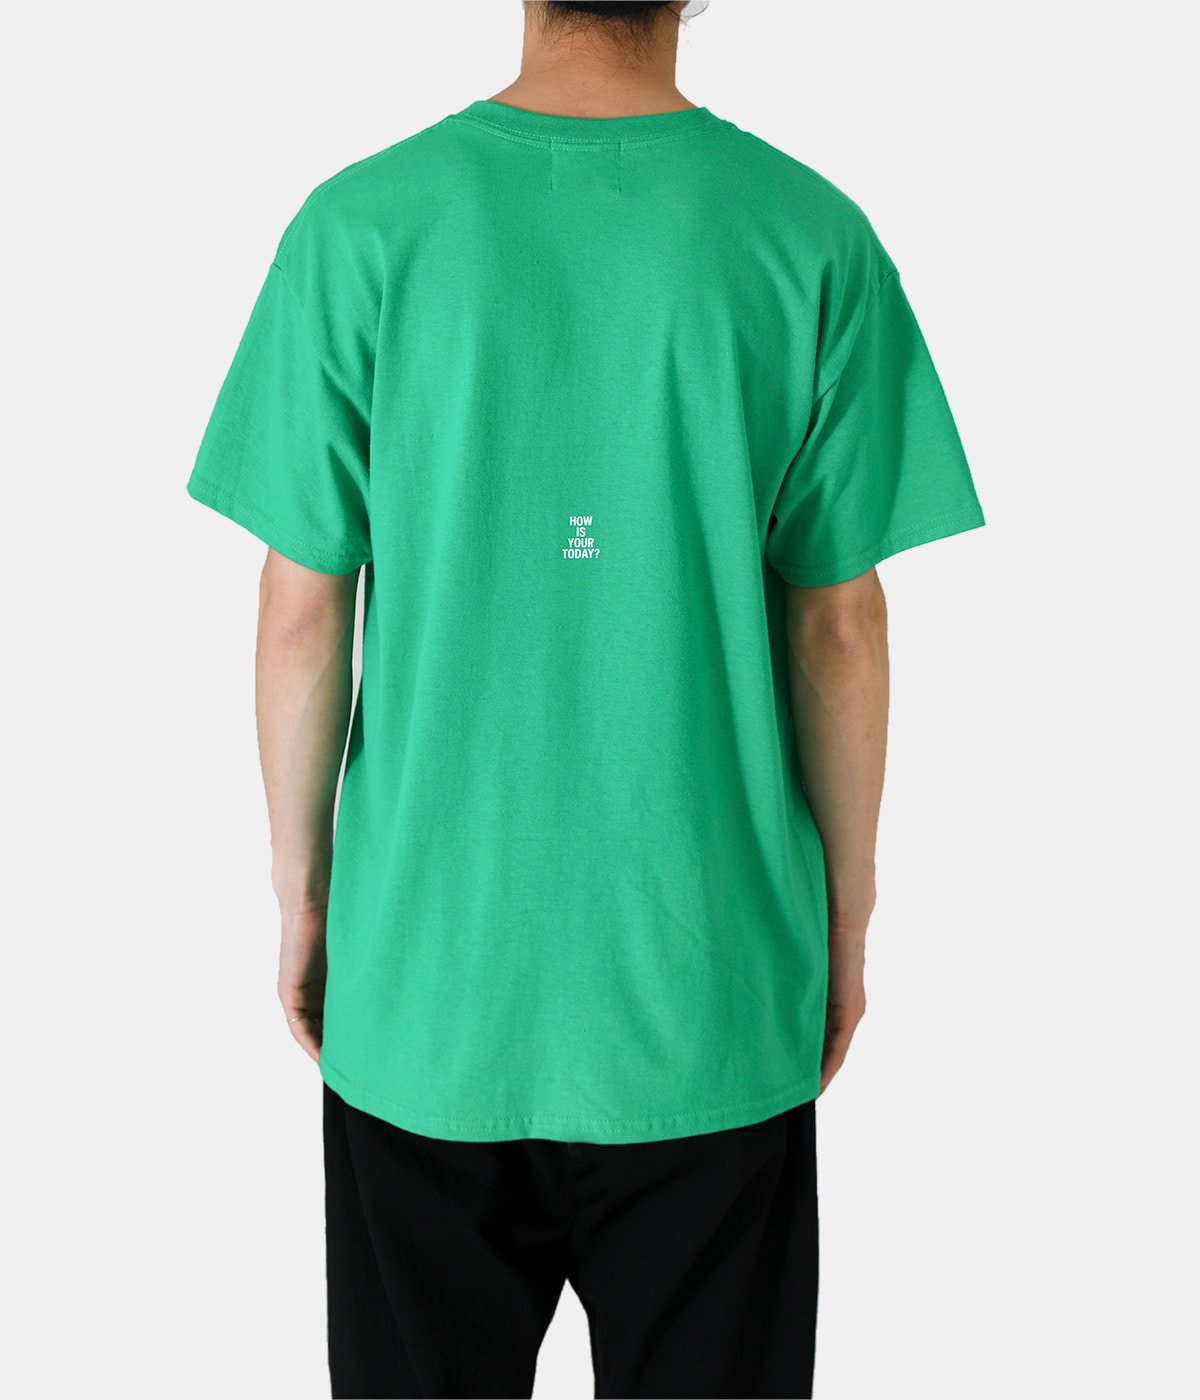 Silhouette SS Tee "Pianist"